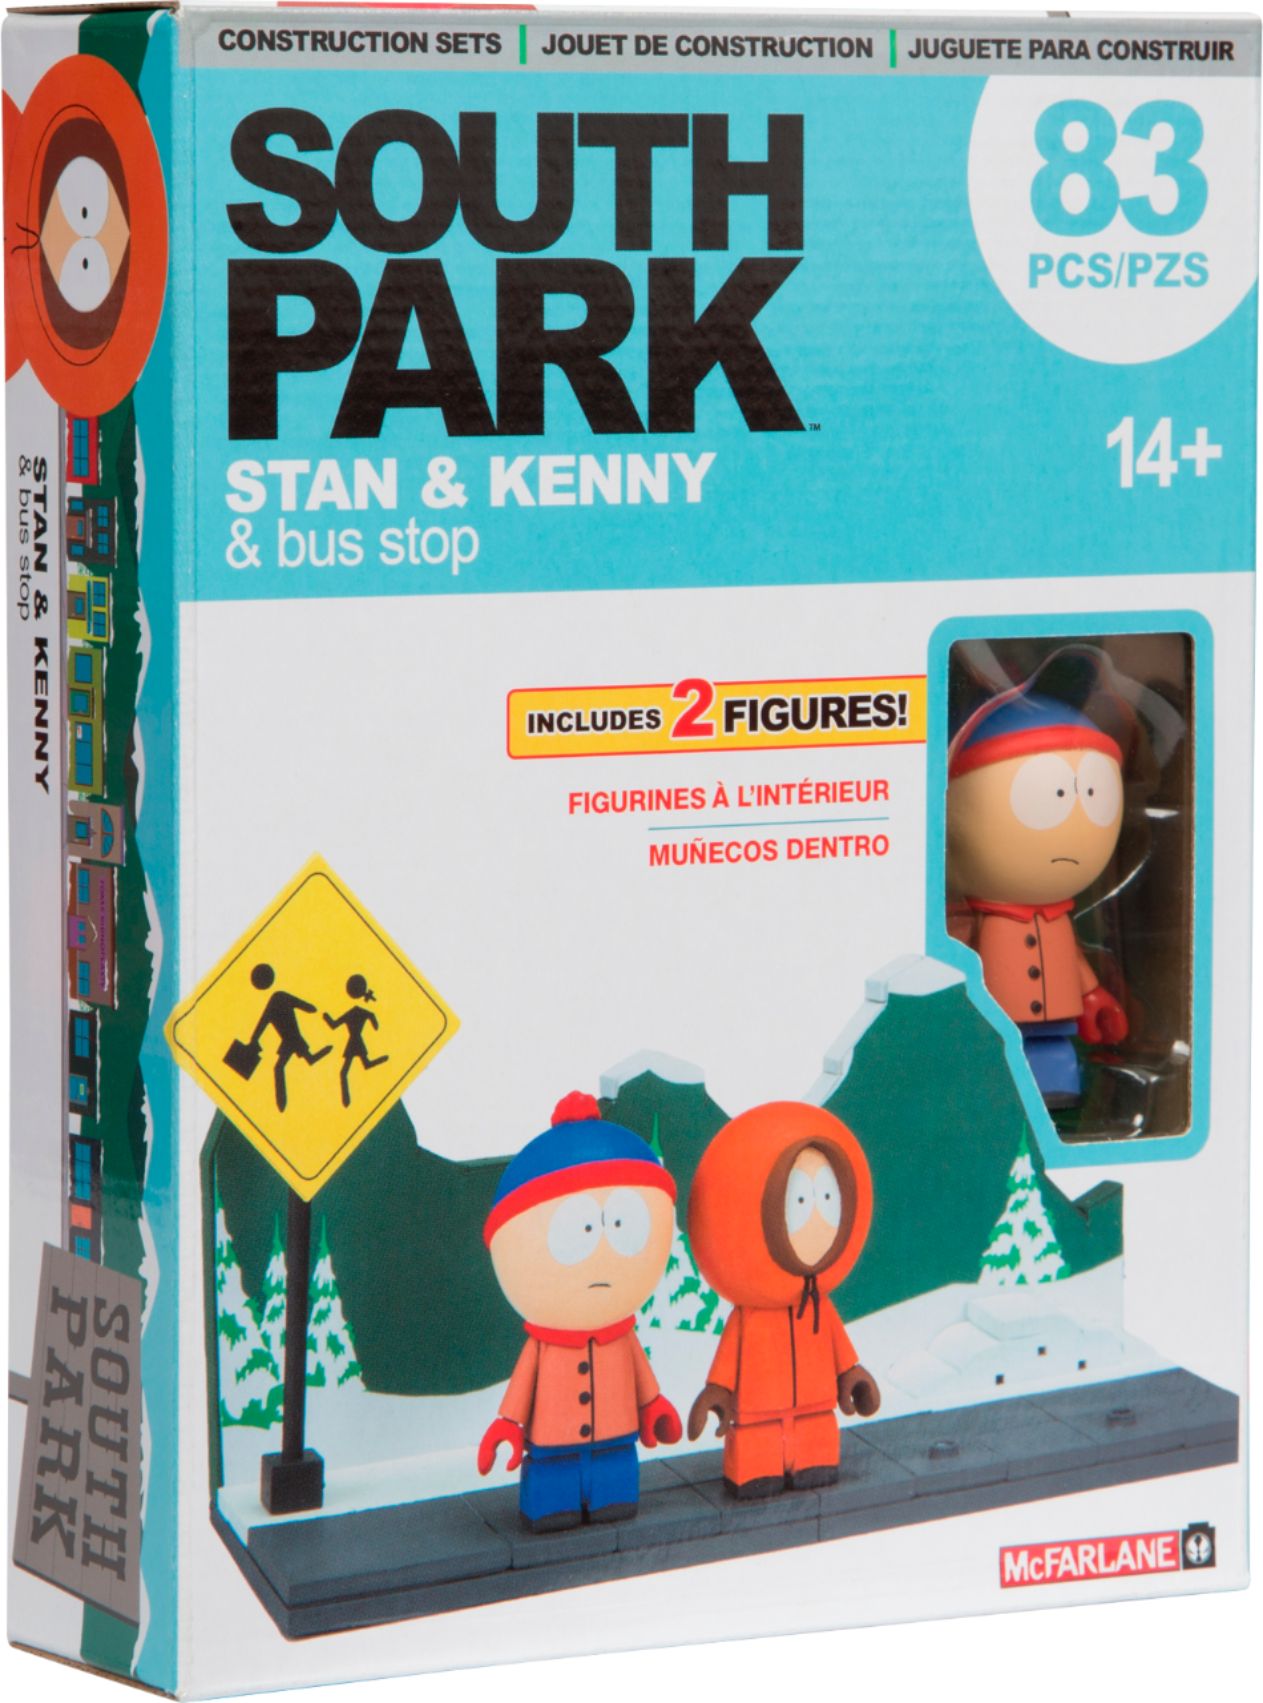 NEW!!! PRINCIPAL'S OFFICE McFarlane Toys Building Small Sets South Park 